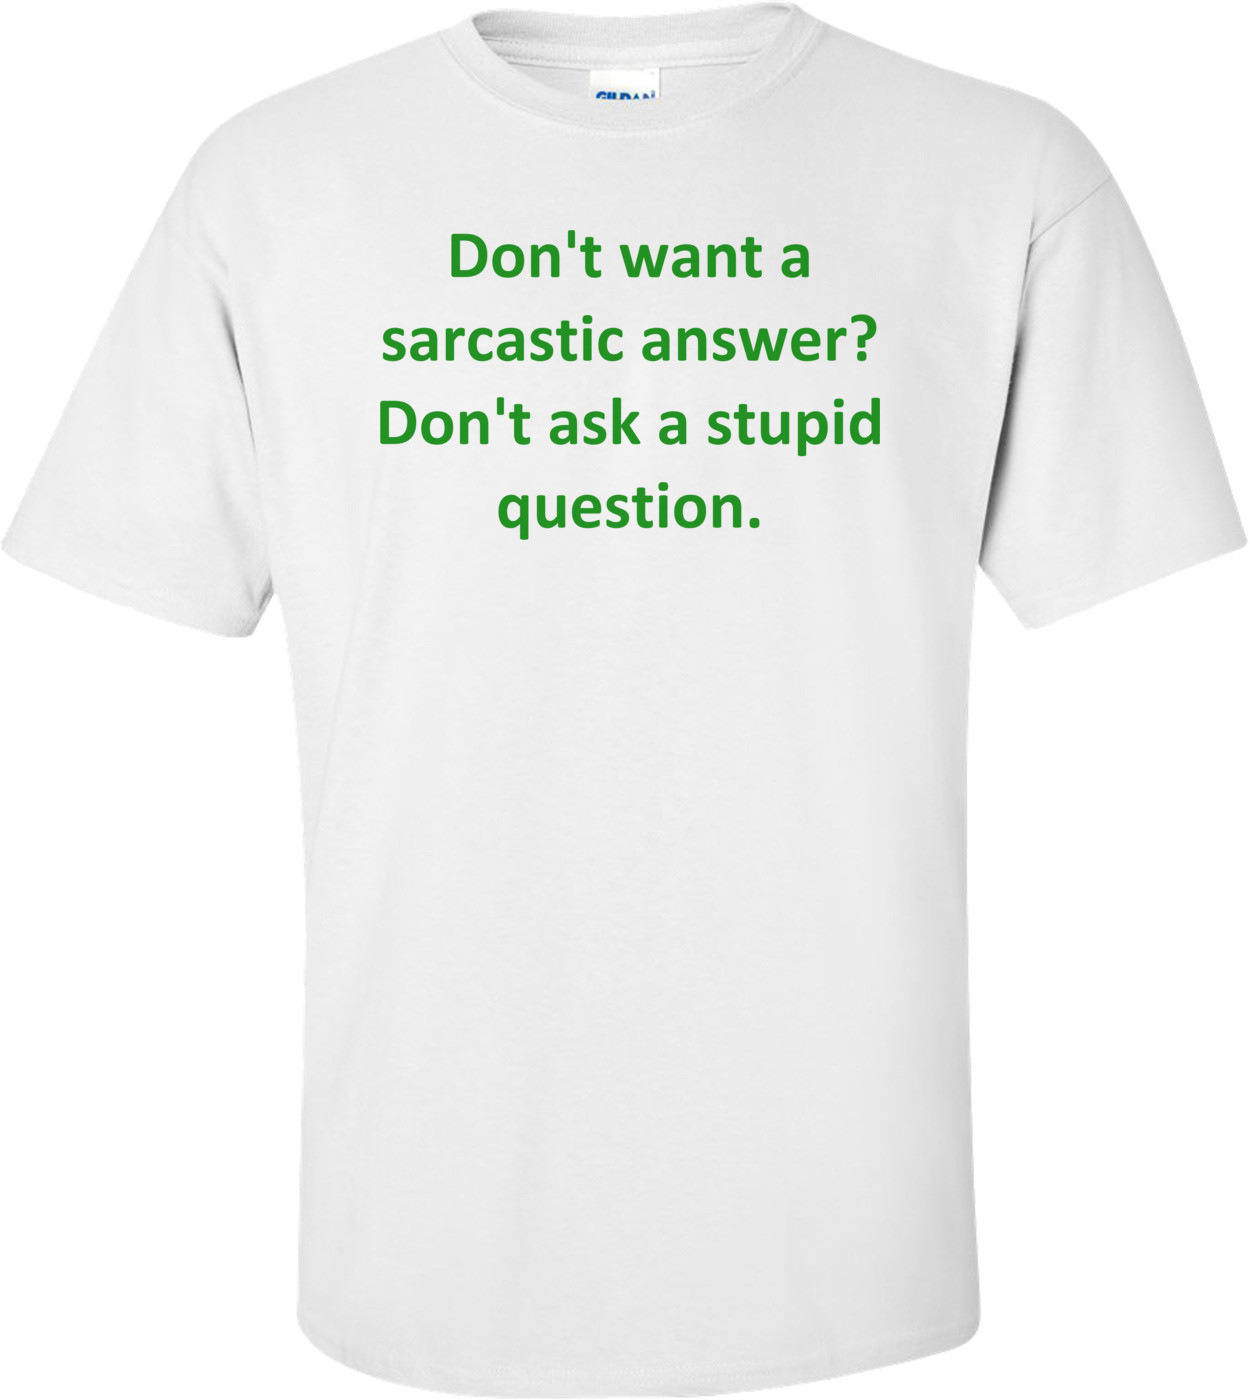 Don't want a sarcastic answer? Don't ask a stupid question.